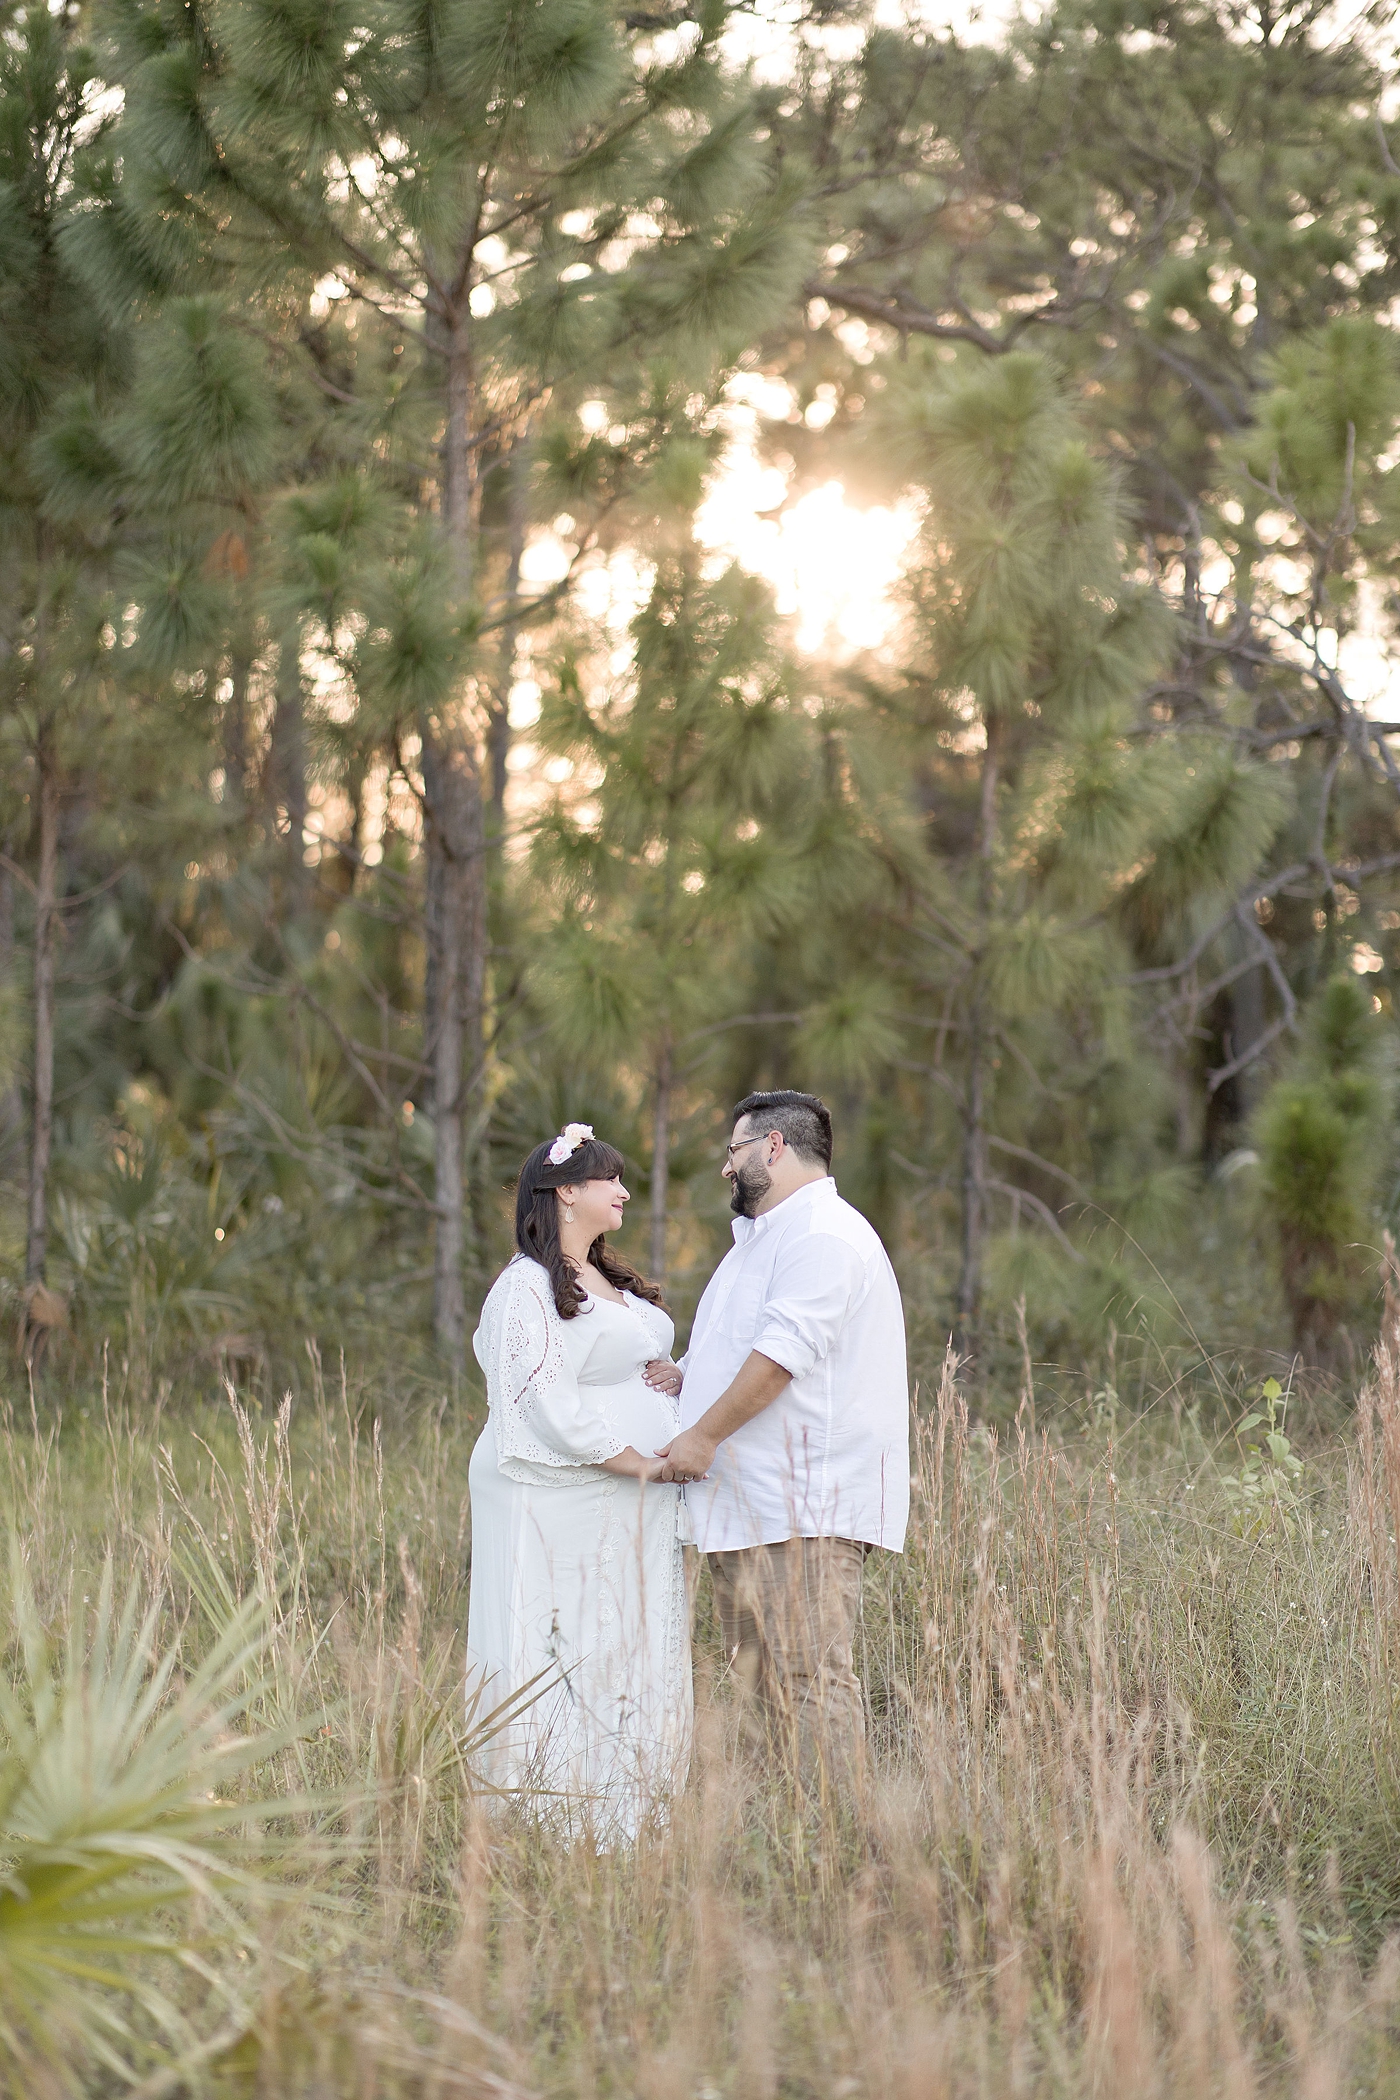 Mom and dad to be hold hands in field. Photo by South Florida Maternity Photographer Ivanna Vidal Photography.